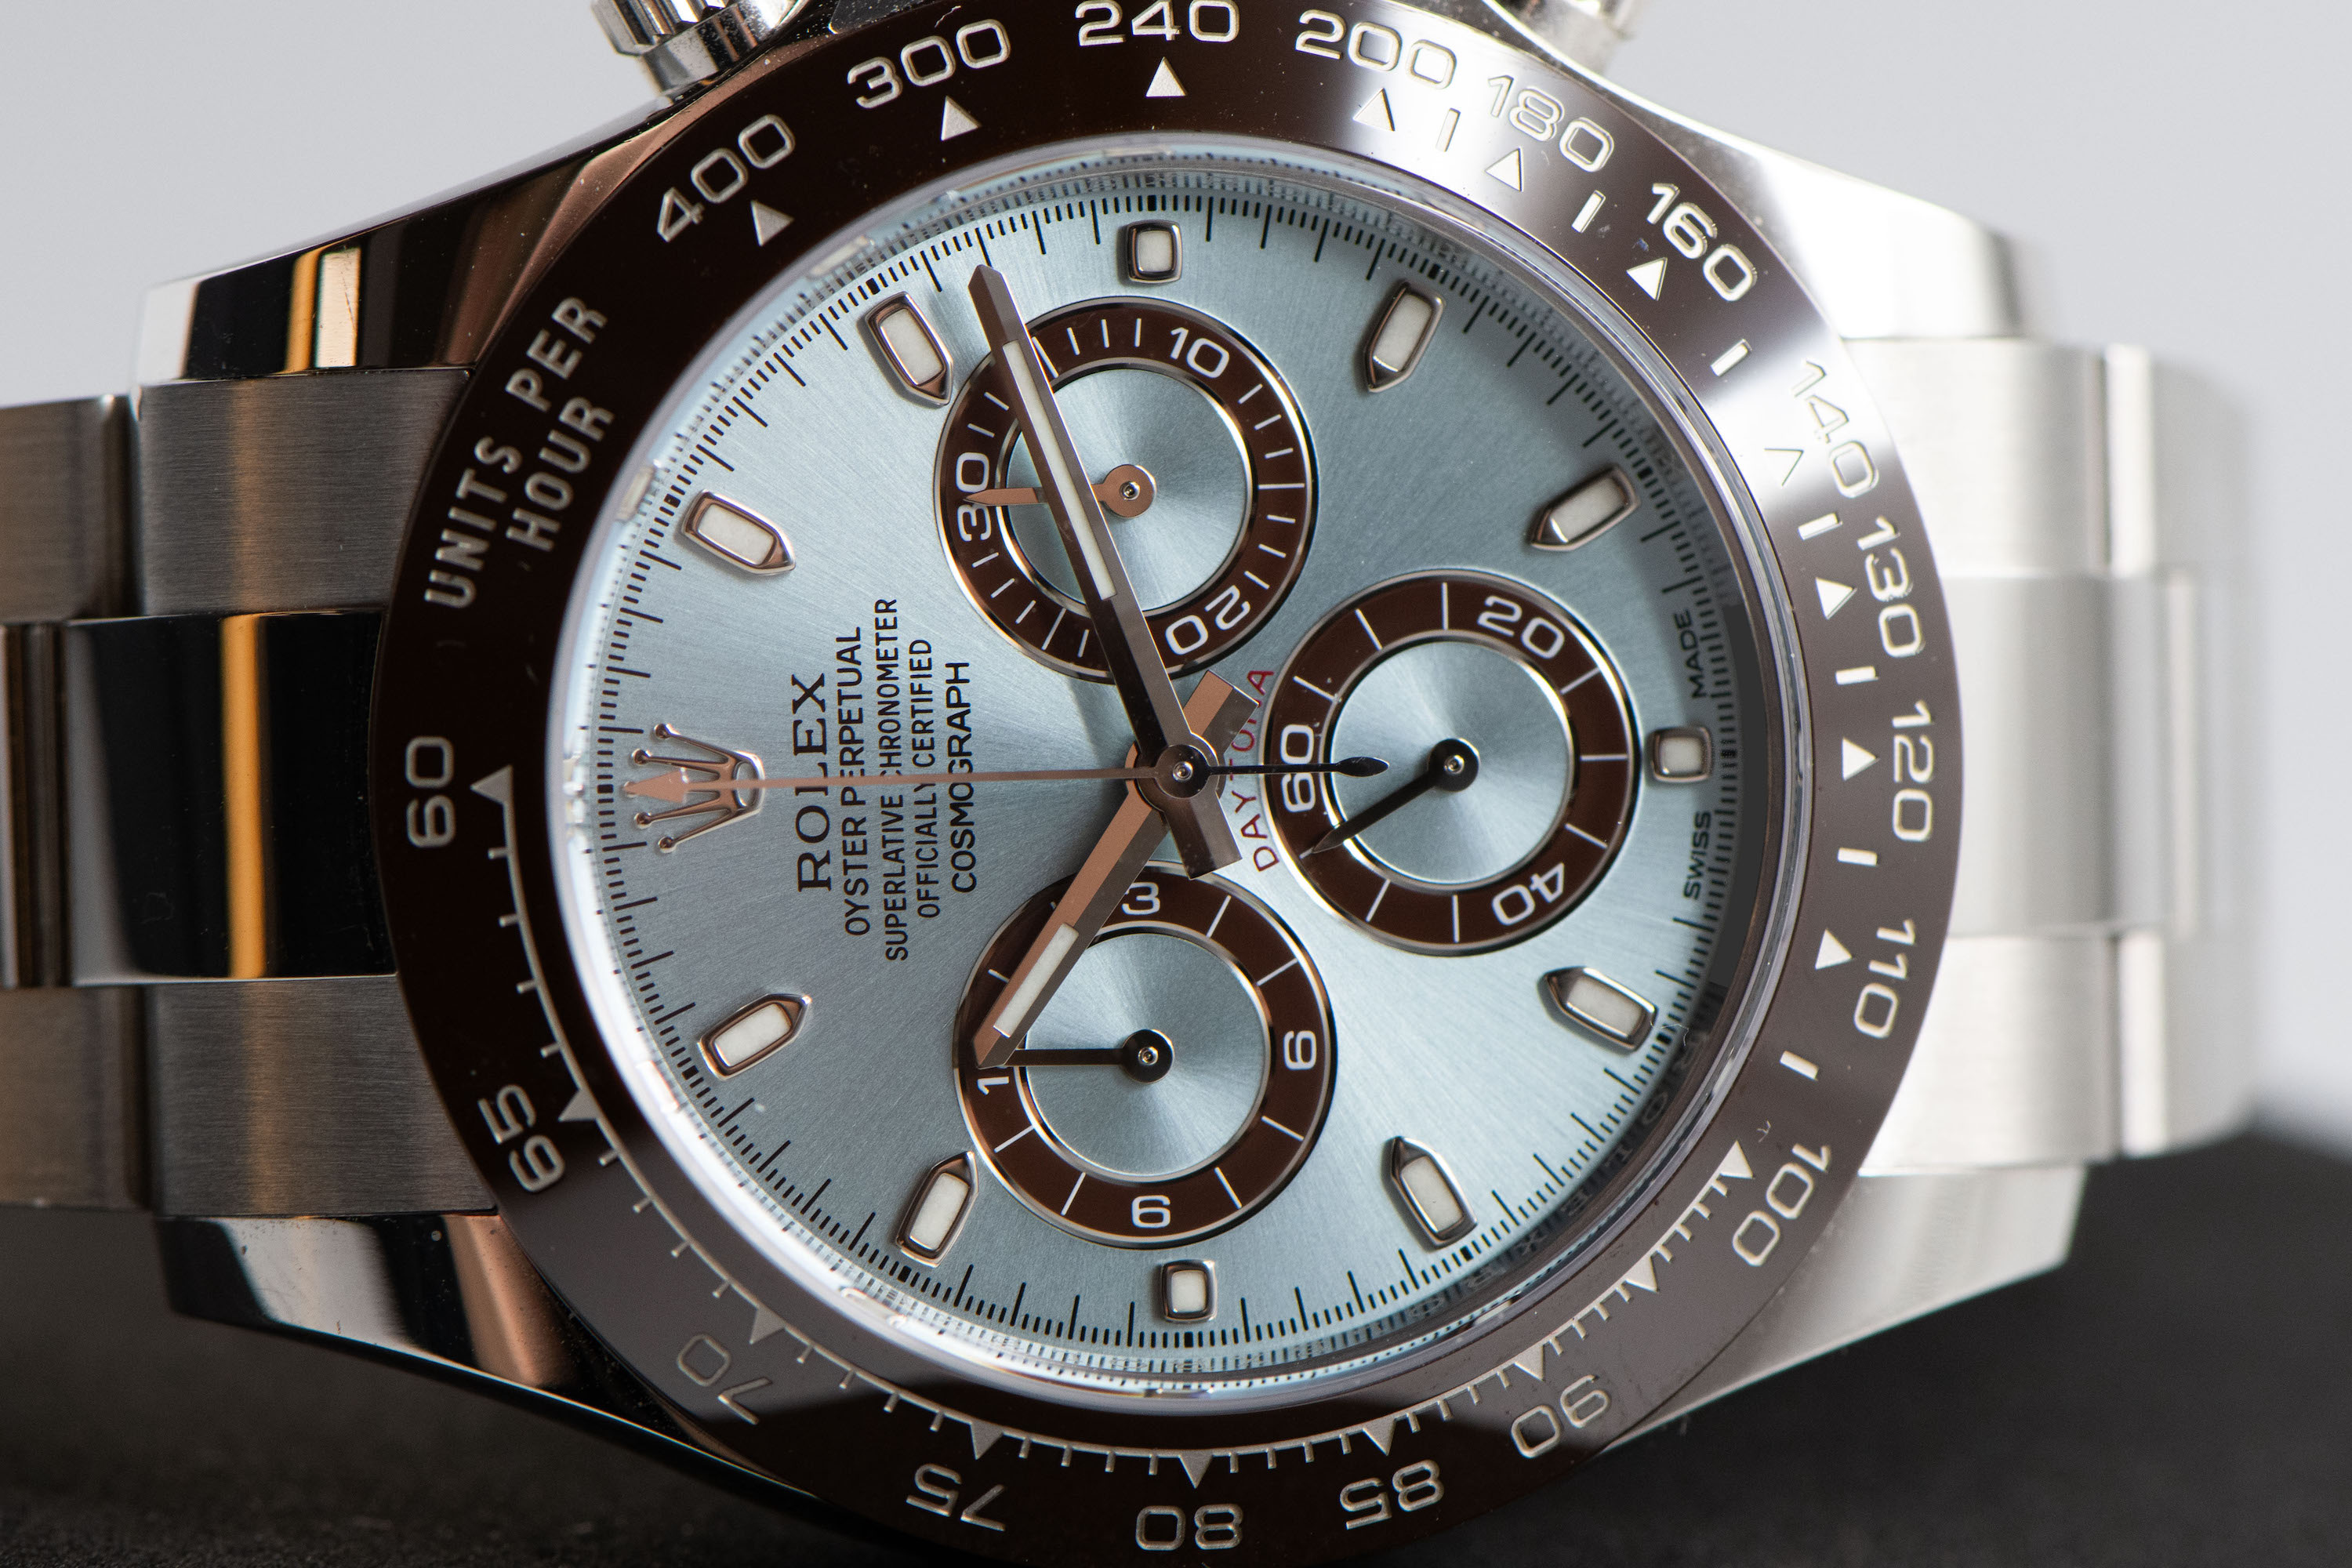 Launched in 2013 to mark the 50th anniversary of the Cosmograph, the ref. 116506 is the first series-production Daytona to be offered in platinum. 0